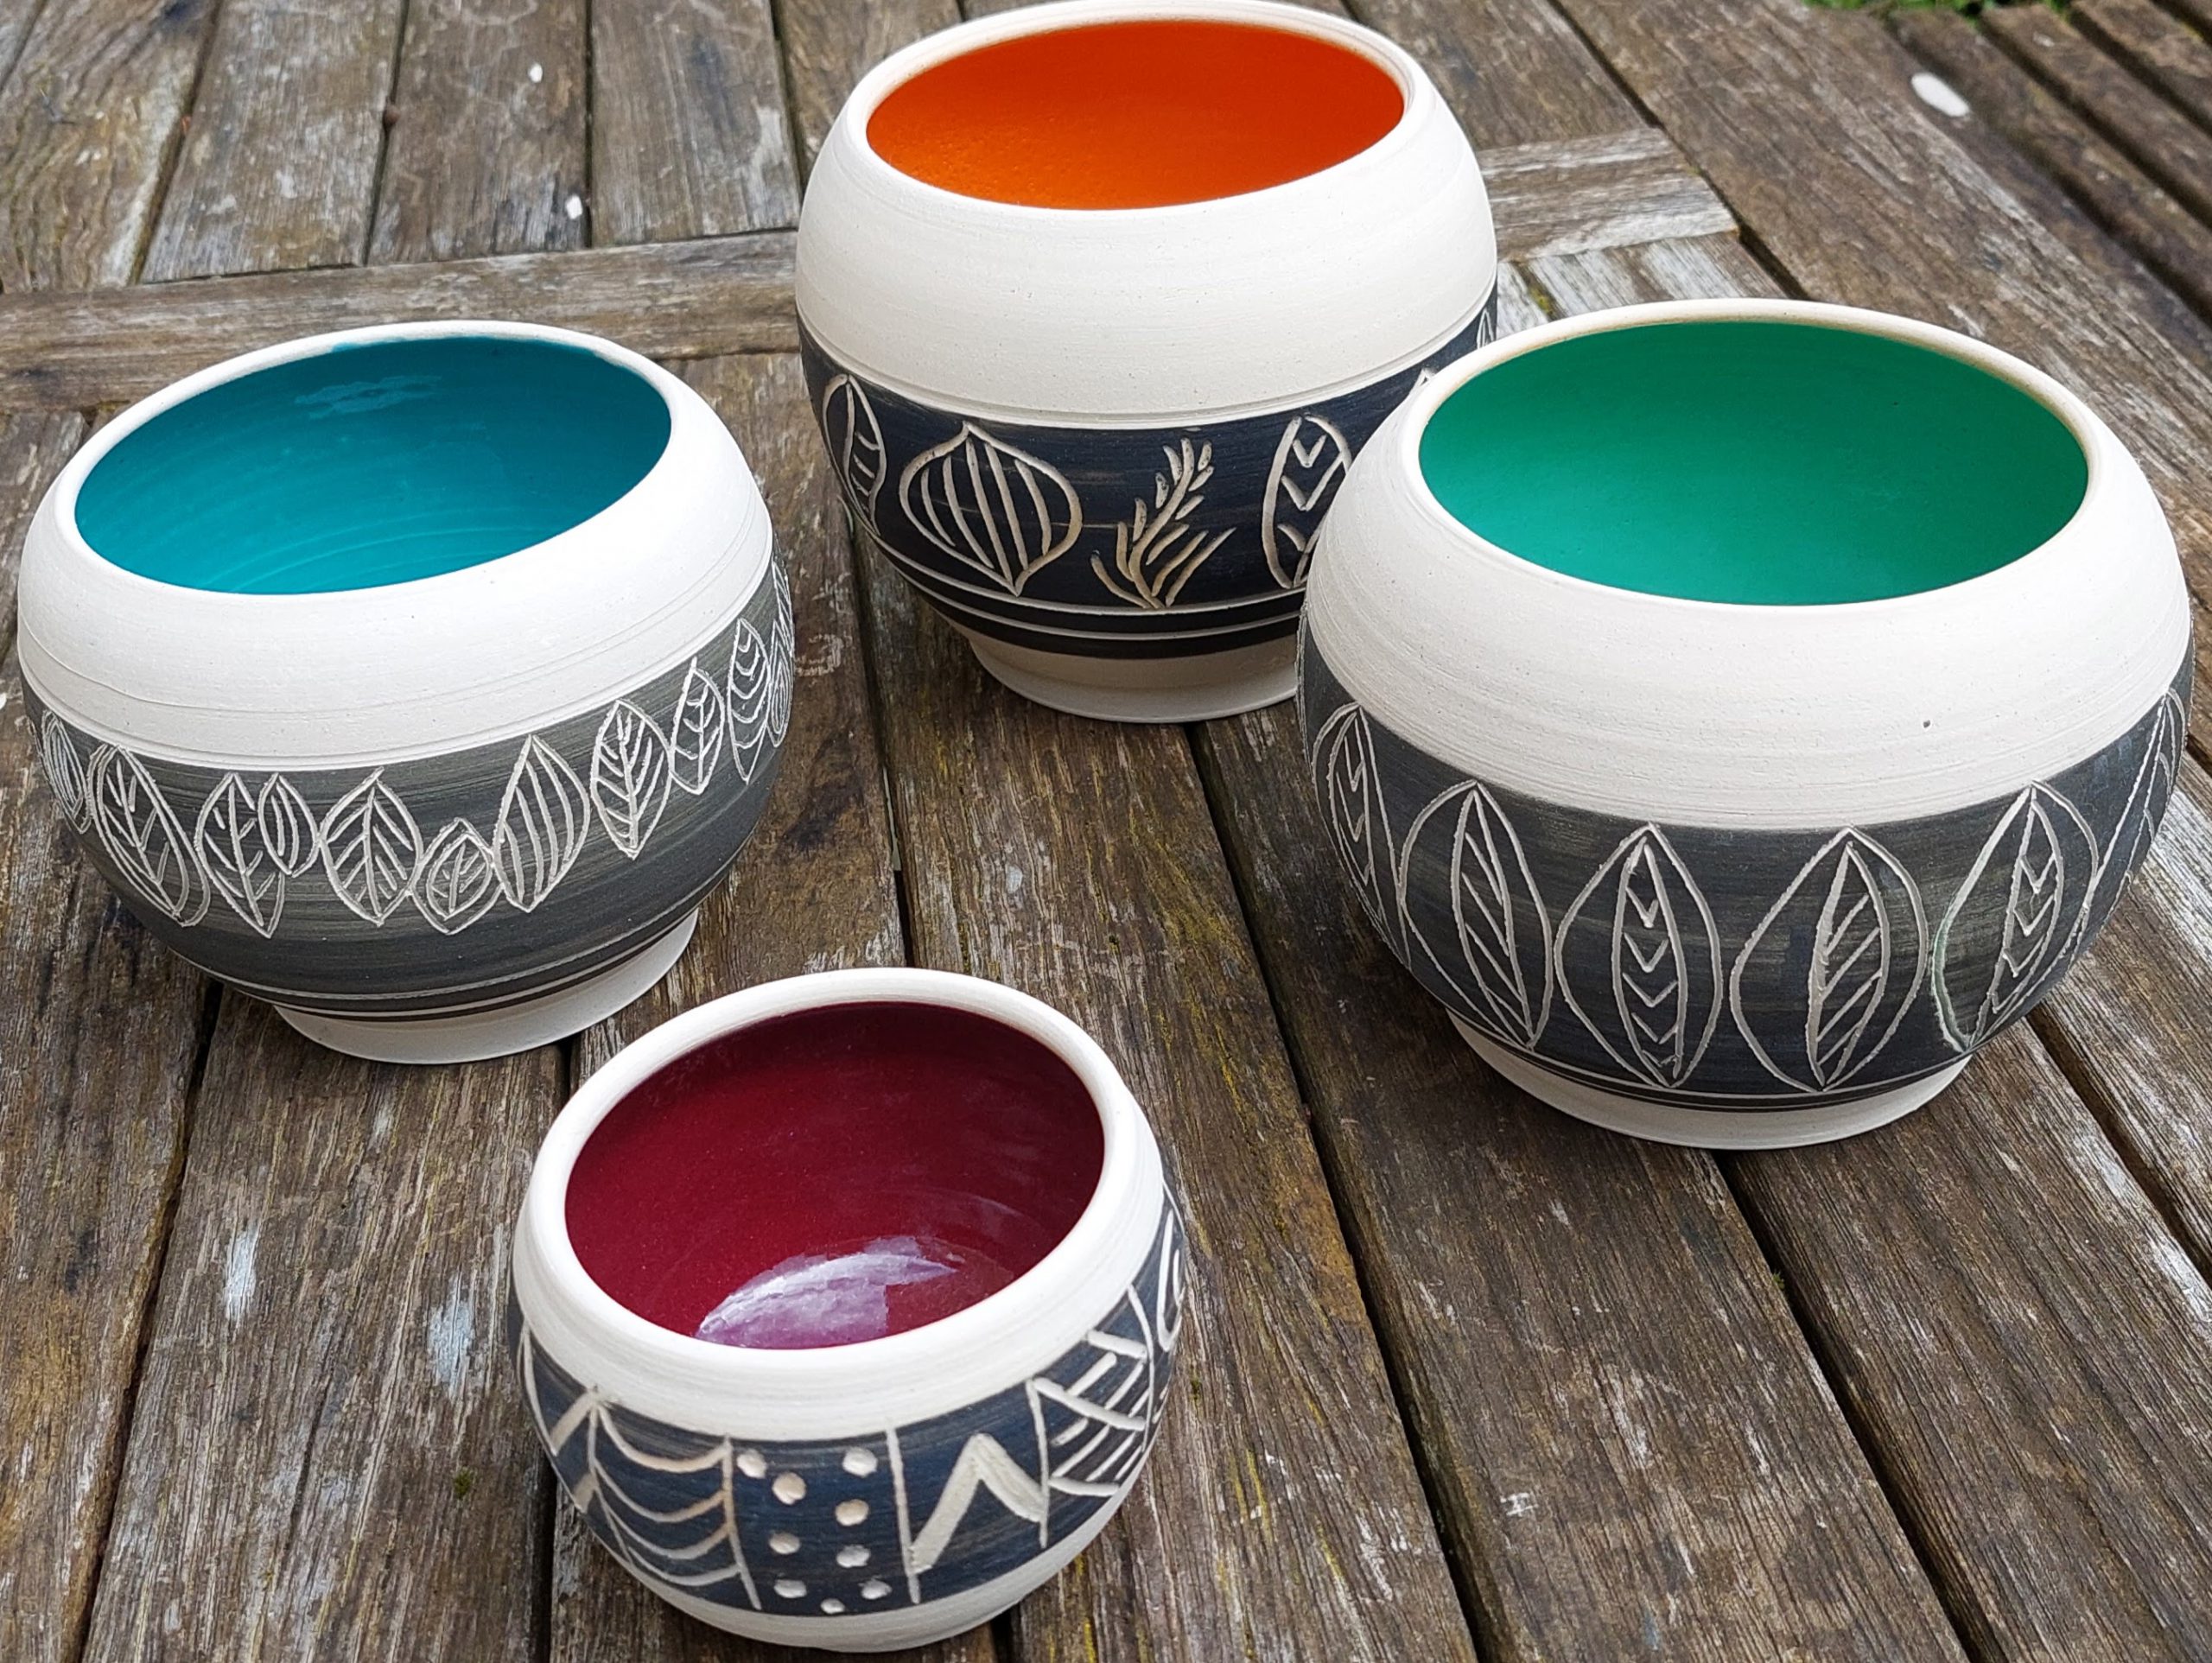 Four stoneware wheel thrown bowls with sgraffito patterns on charcoal on the outides and glazed insides in blue, orange, green and red, respectively.